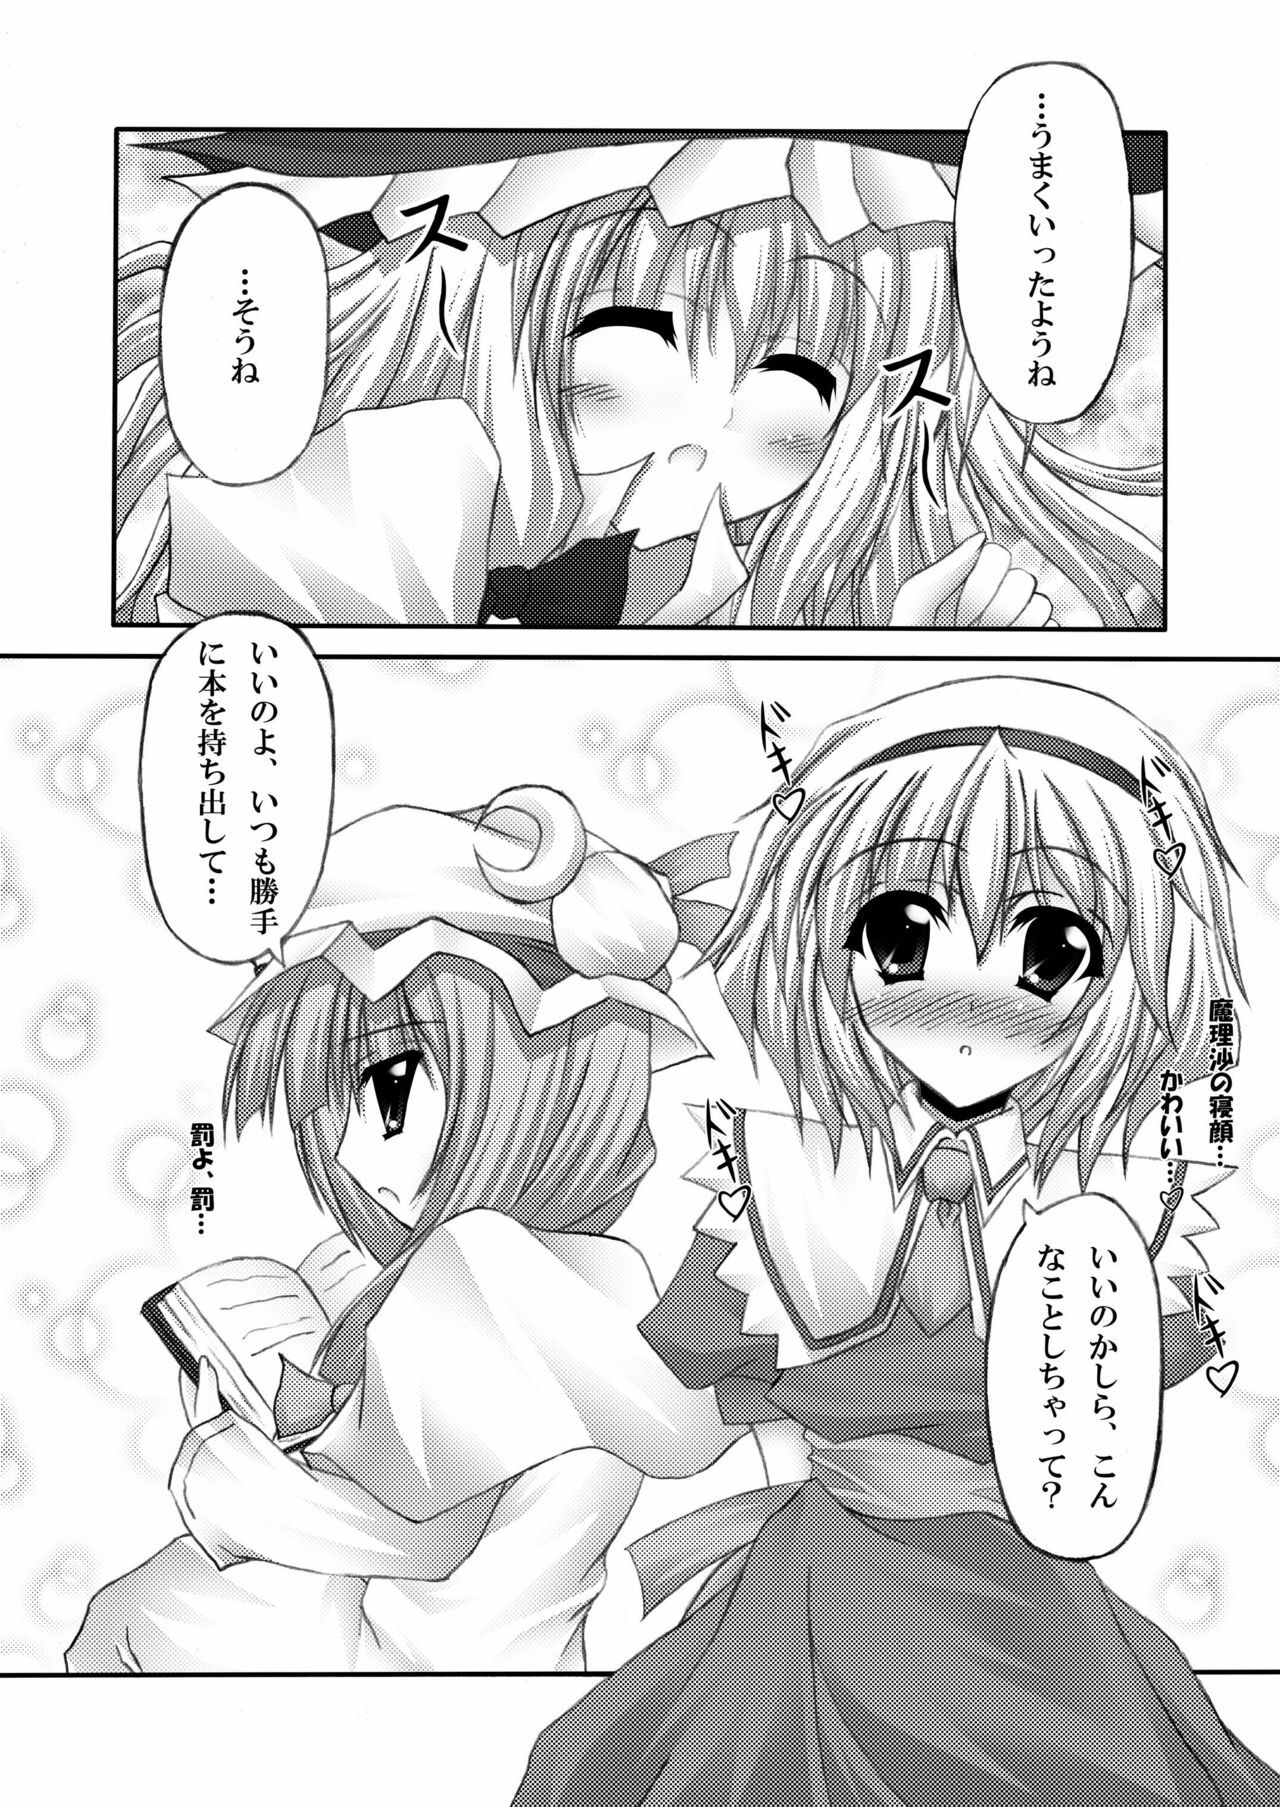 [Chronicle (YUKITO)] Only my wizard (Touhou Project) [Digital] page 6 full